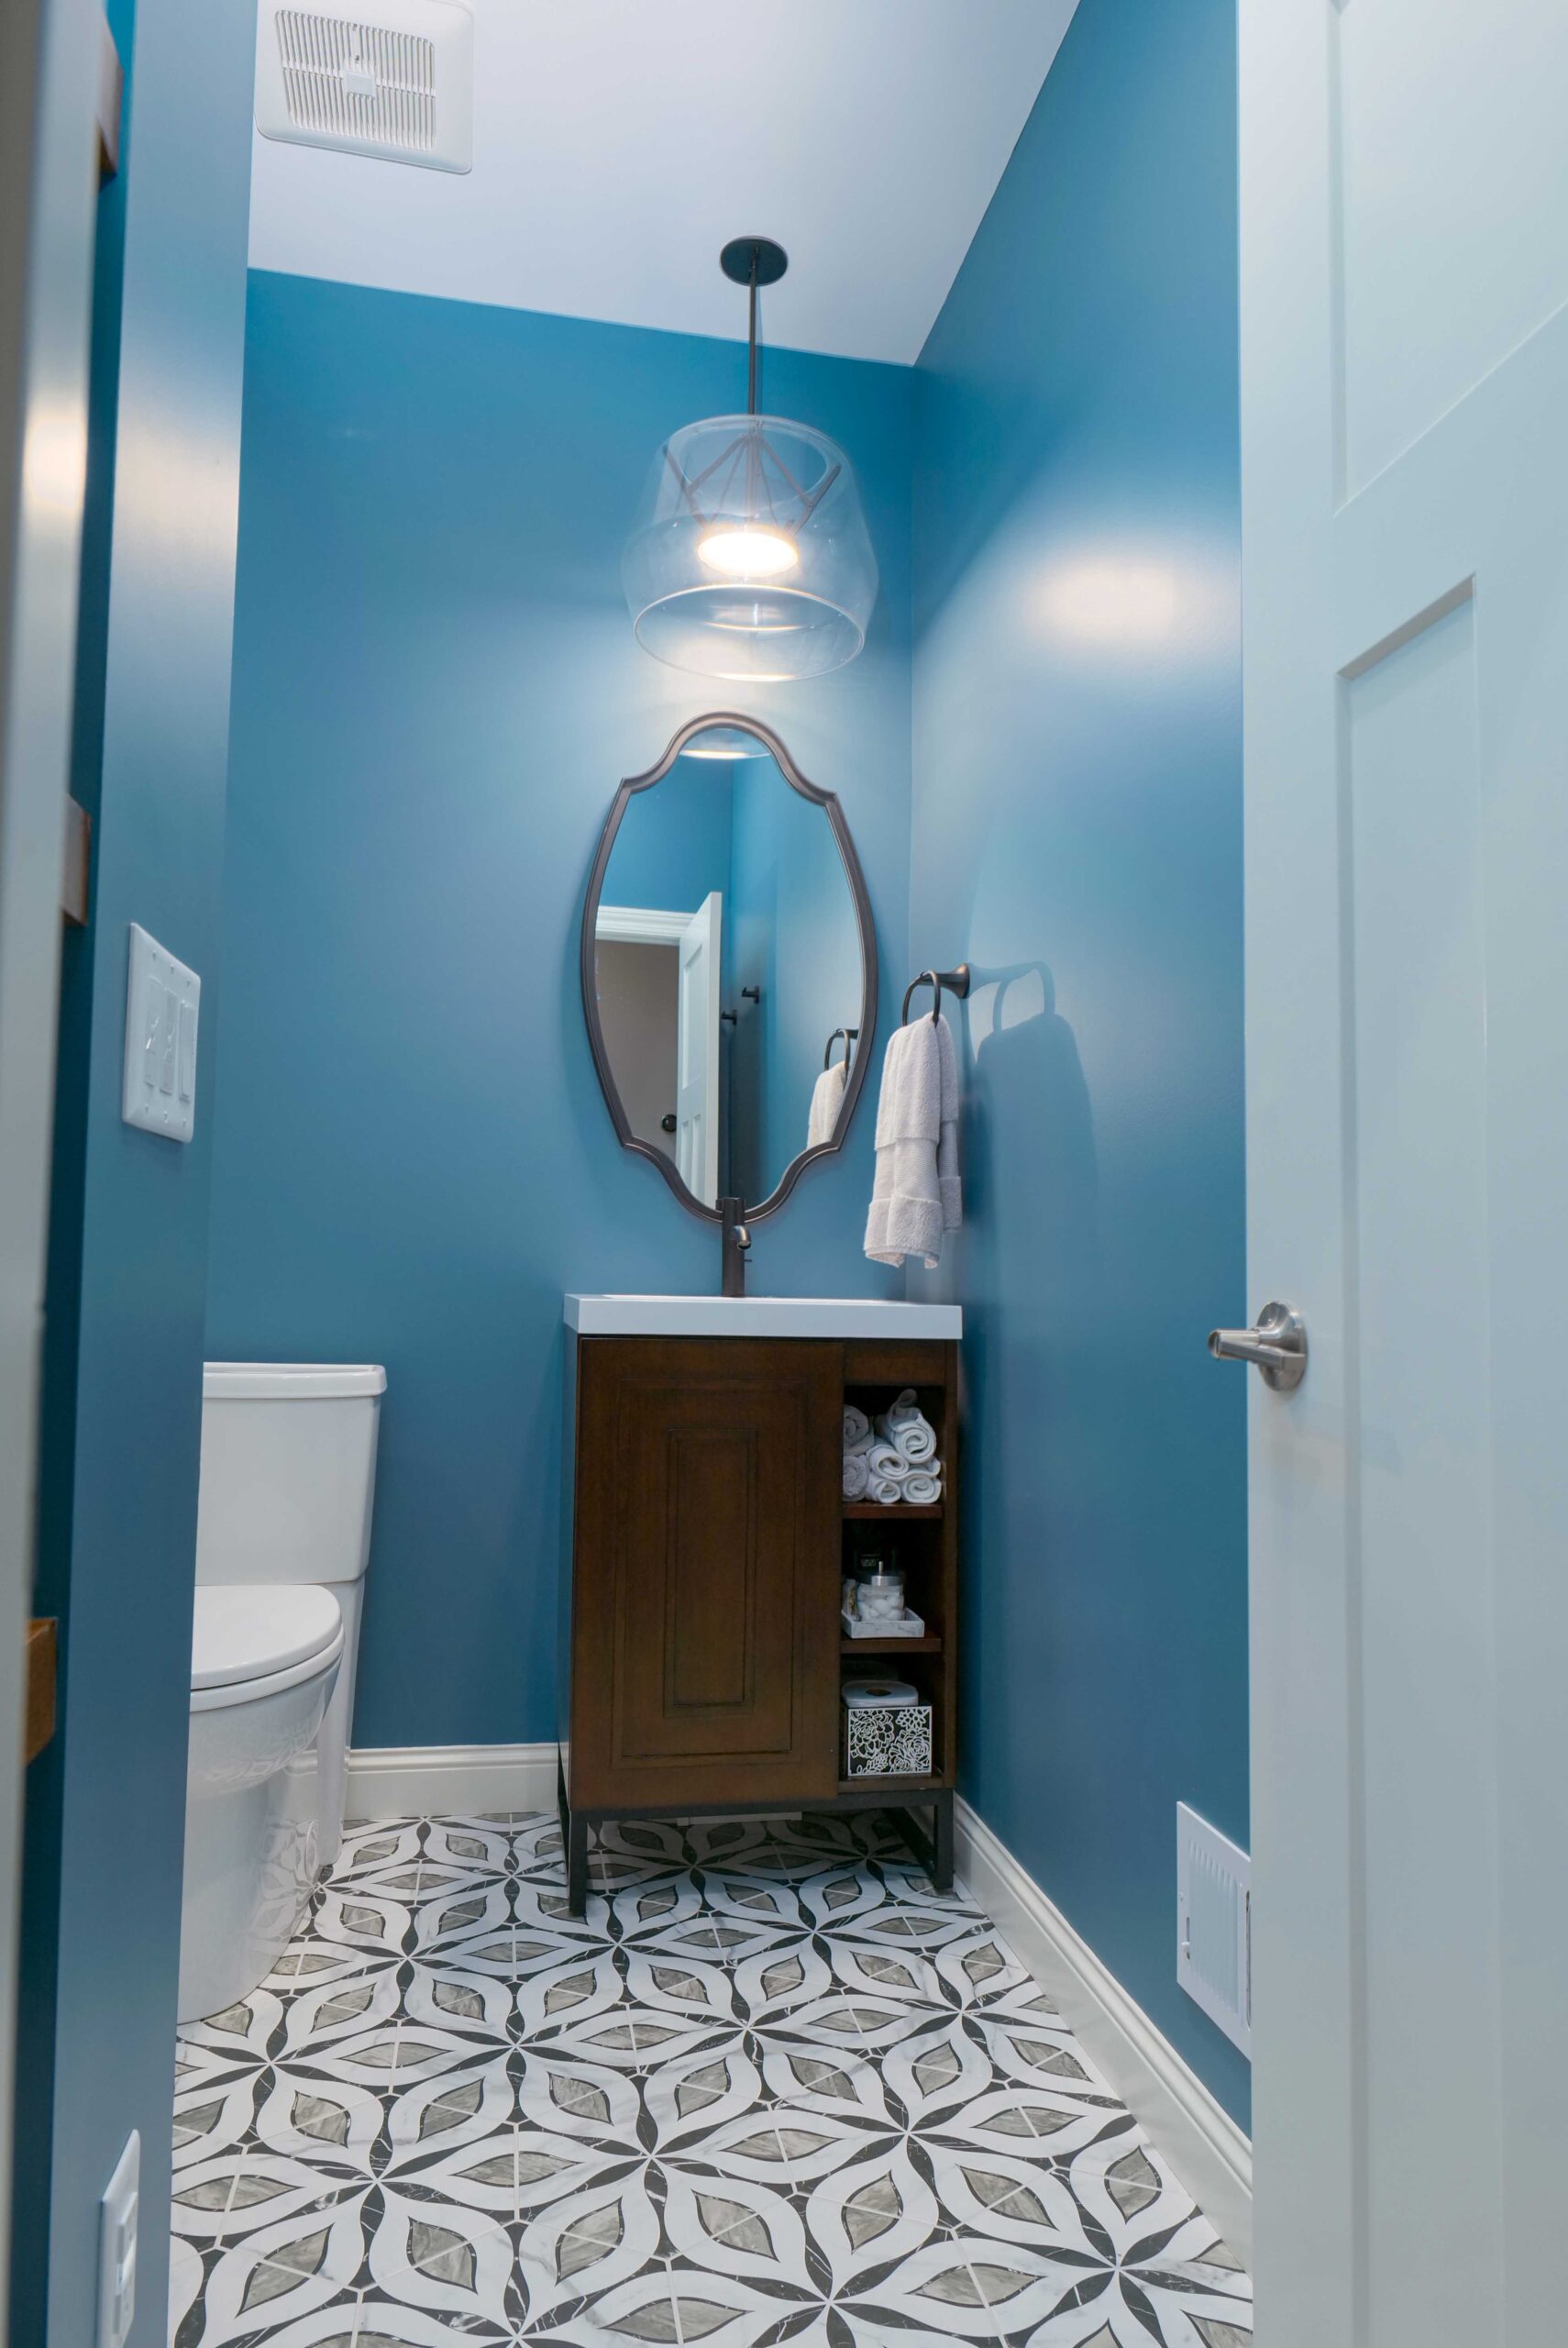 An Orchard Lake remodel with blue walls and a tiled floor.